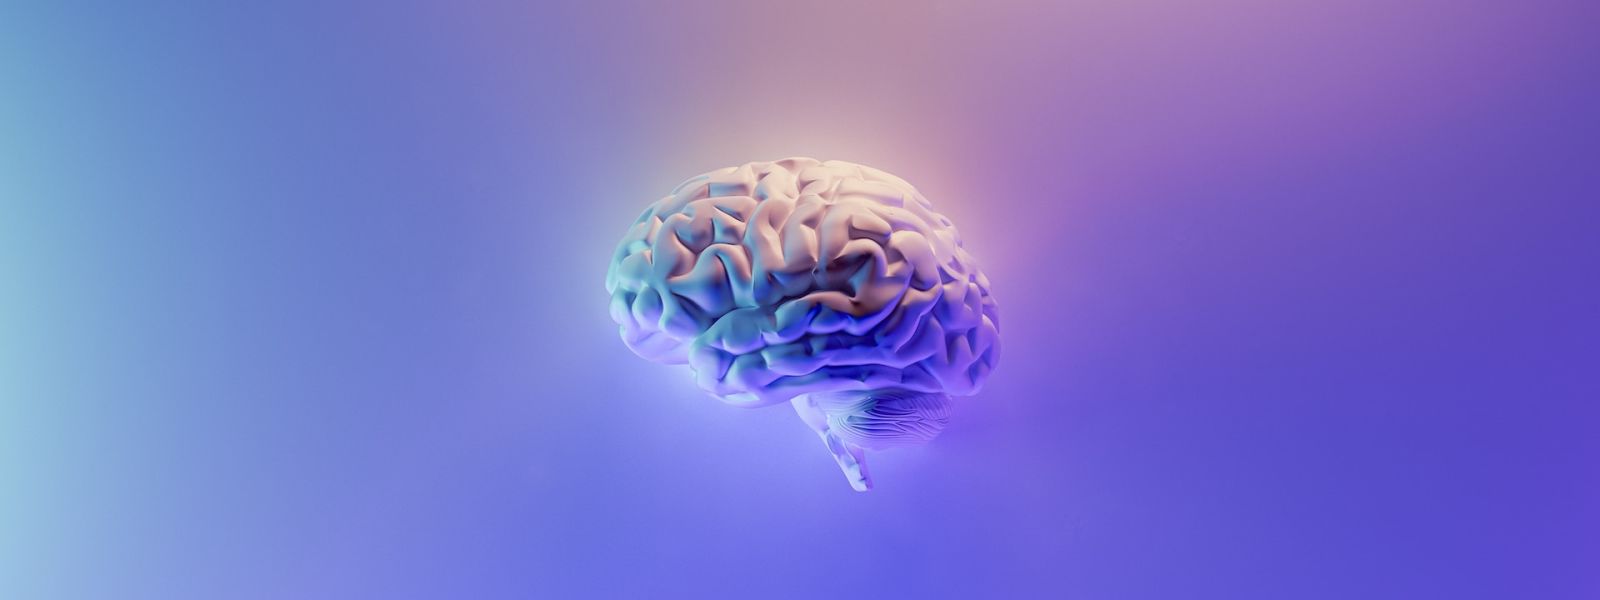 A digital render of a brain with a purple background.